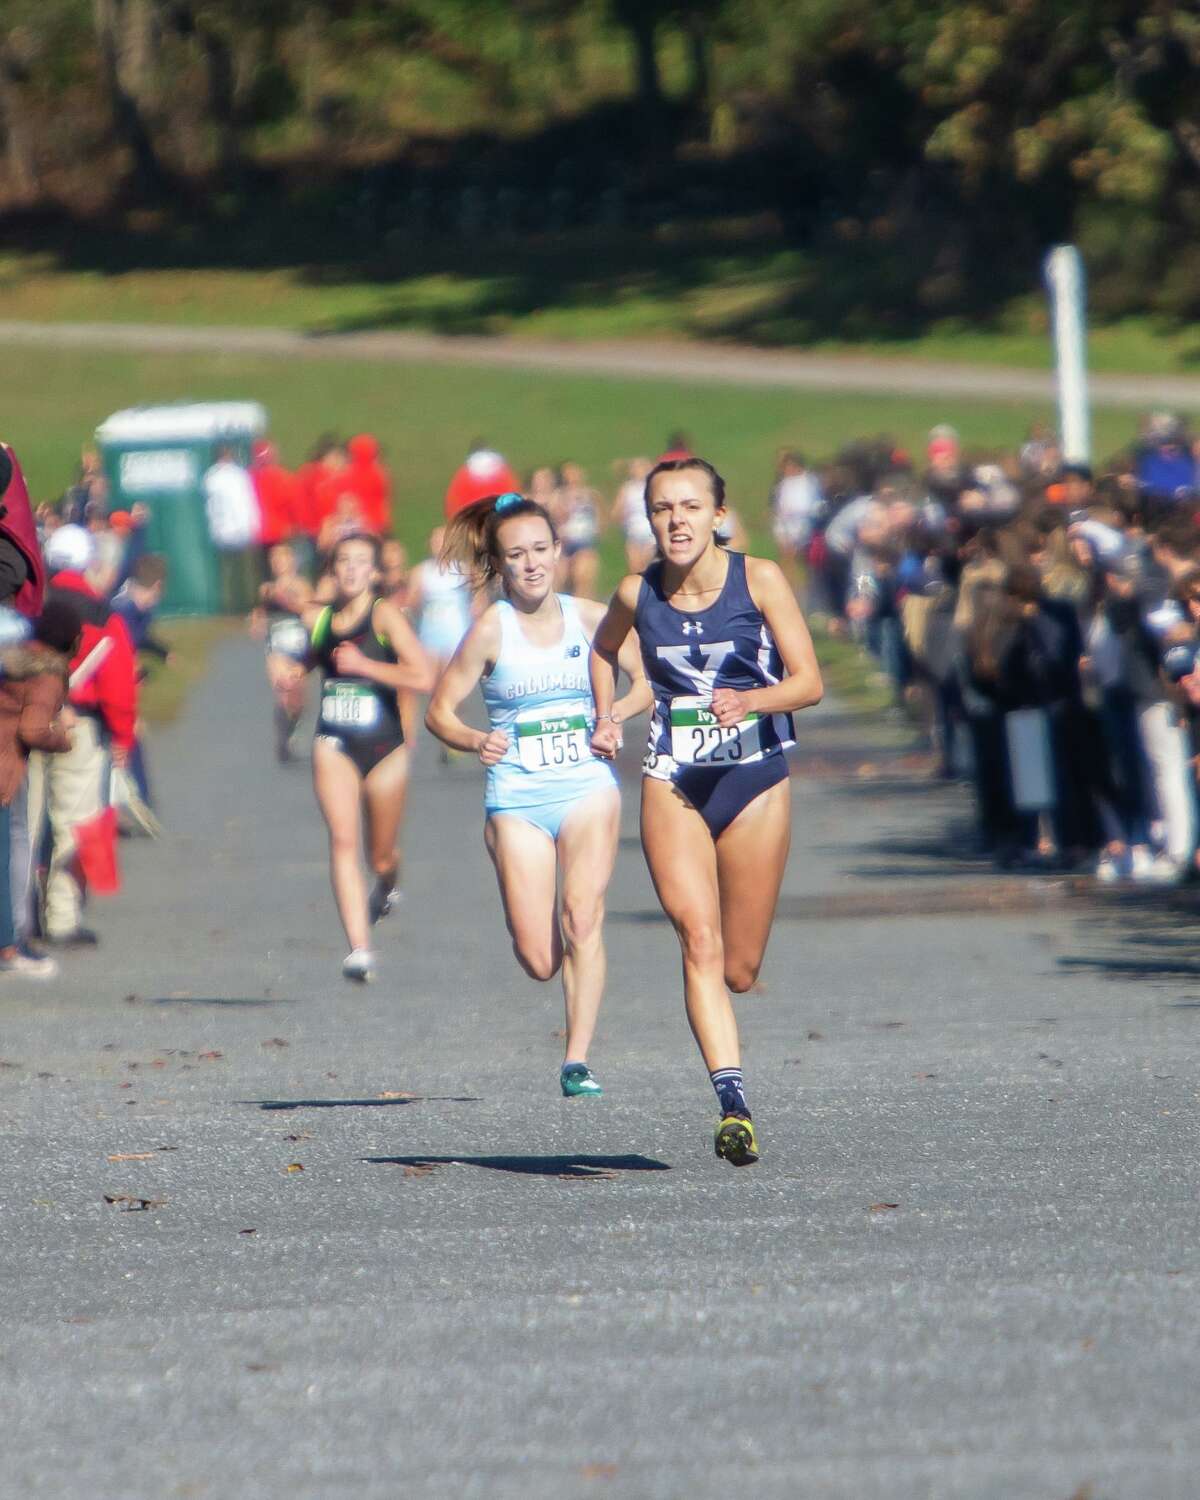 Yale runner Kayley DeLay won the Ivy League women’s cross country individual title.